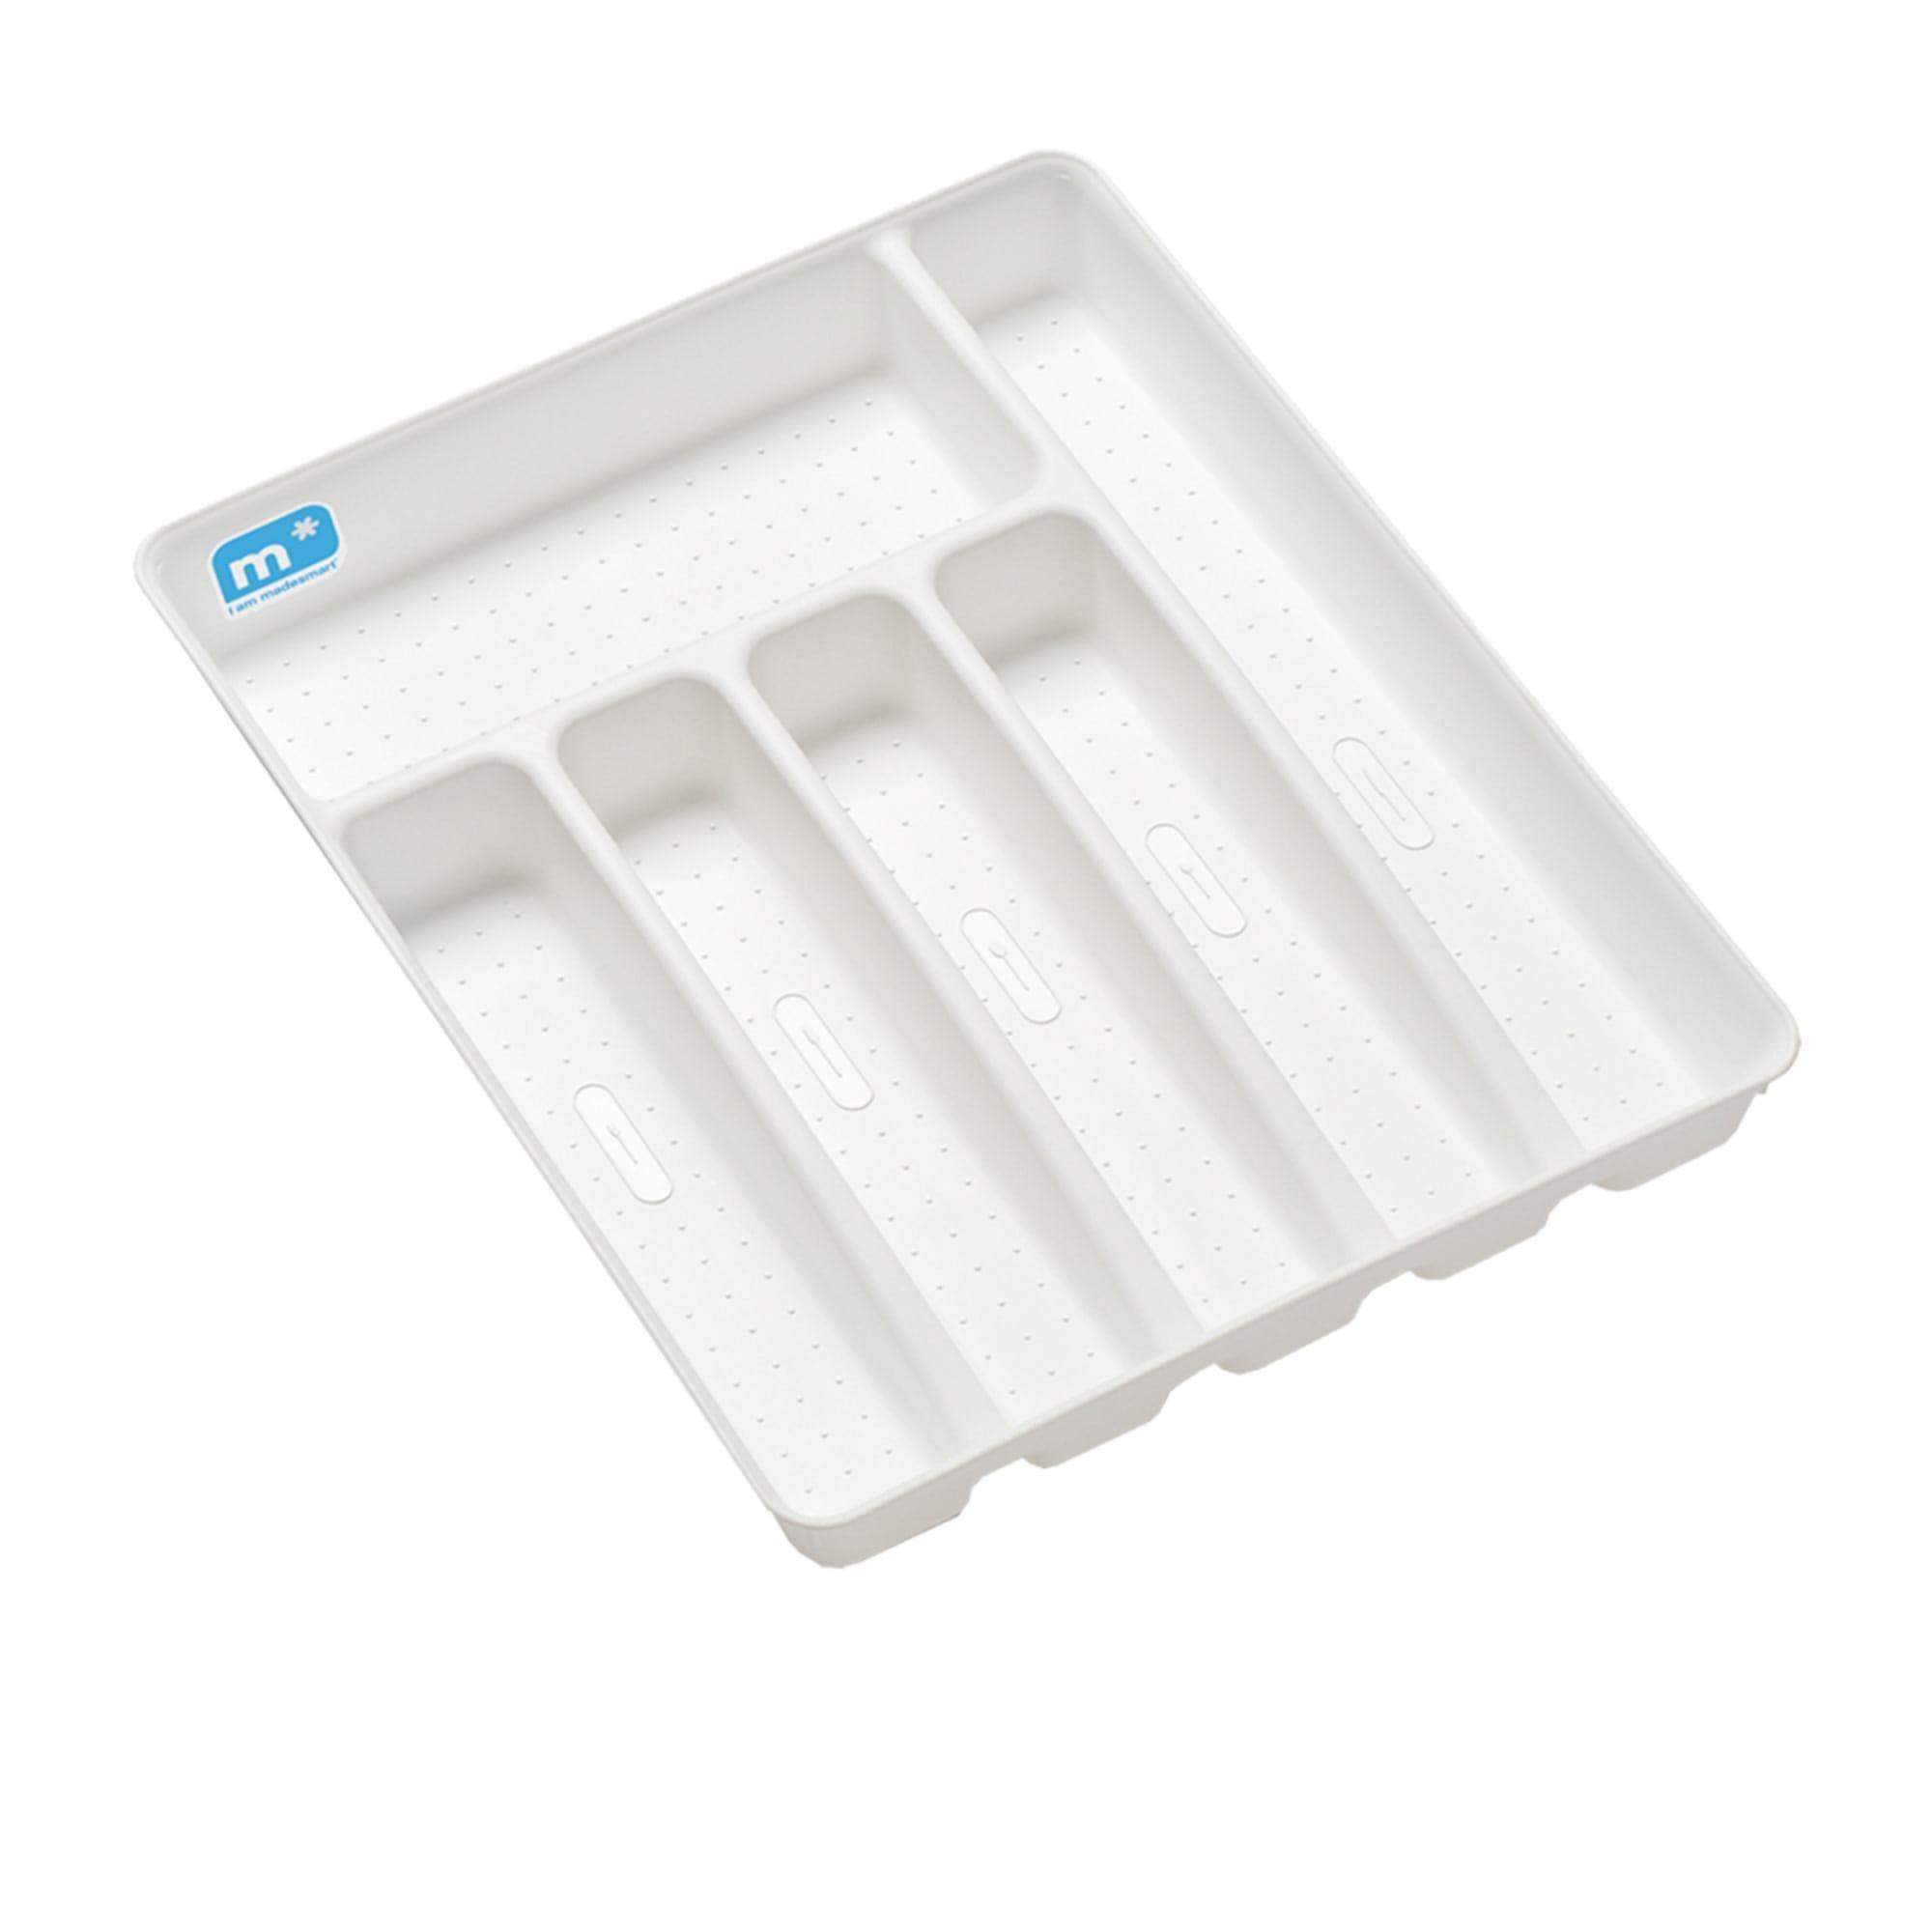 Madesmart Basic Cutlery Tray 6 Compartment White Image 1